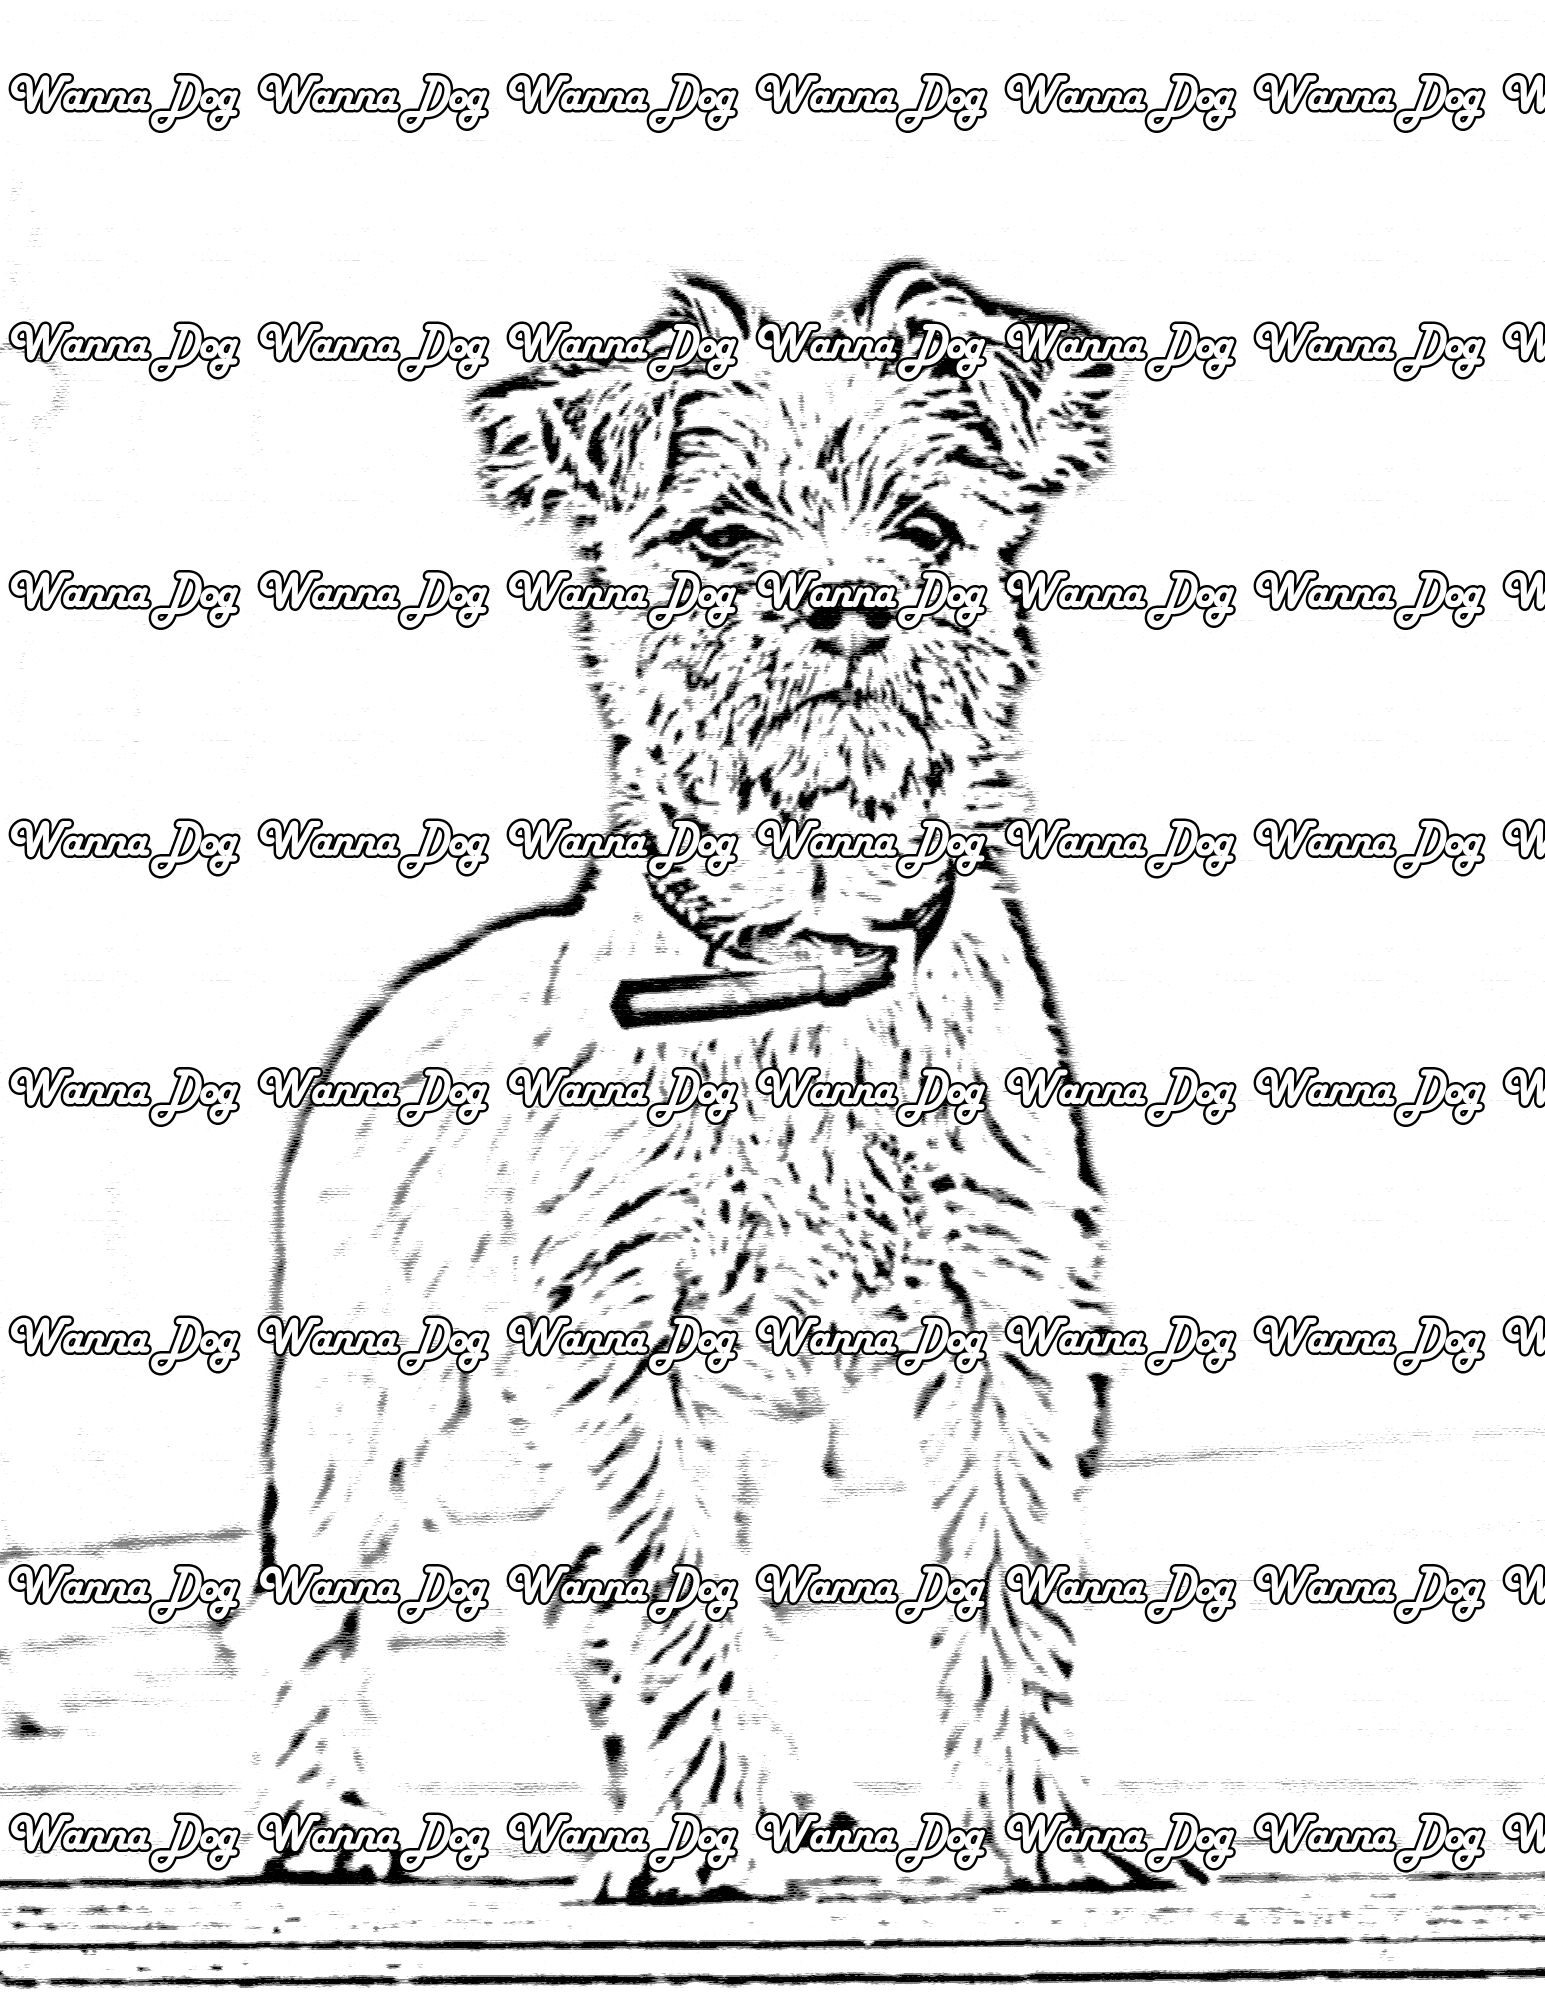 Cairn Terrier Coloring Page of a Cairn Terrier standing outside